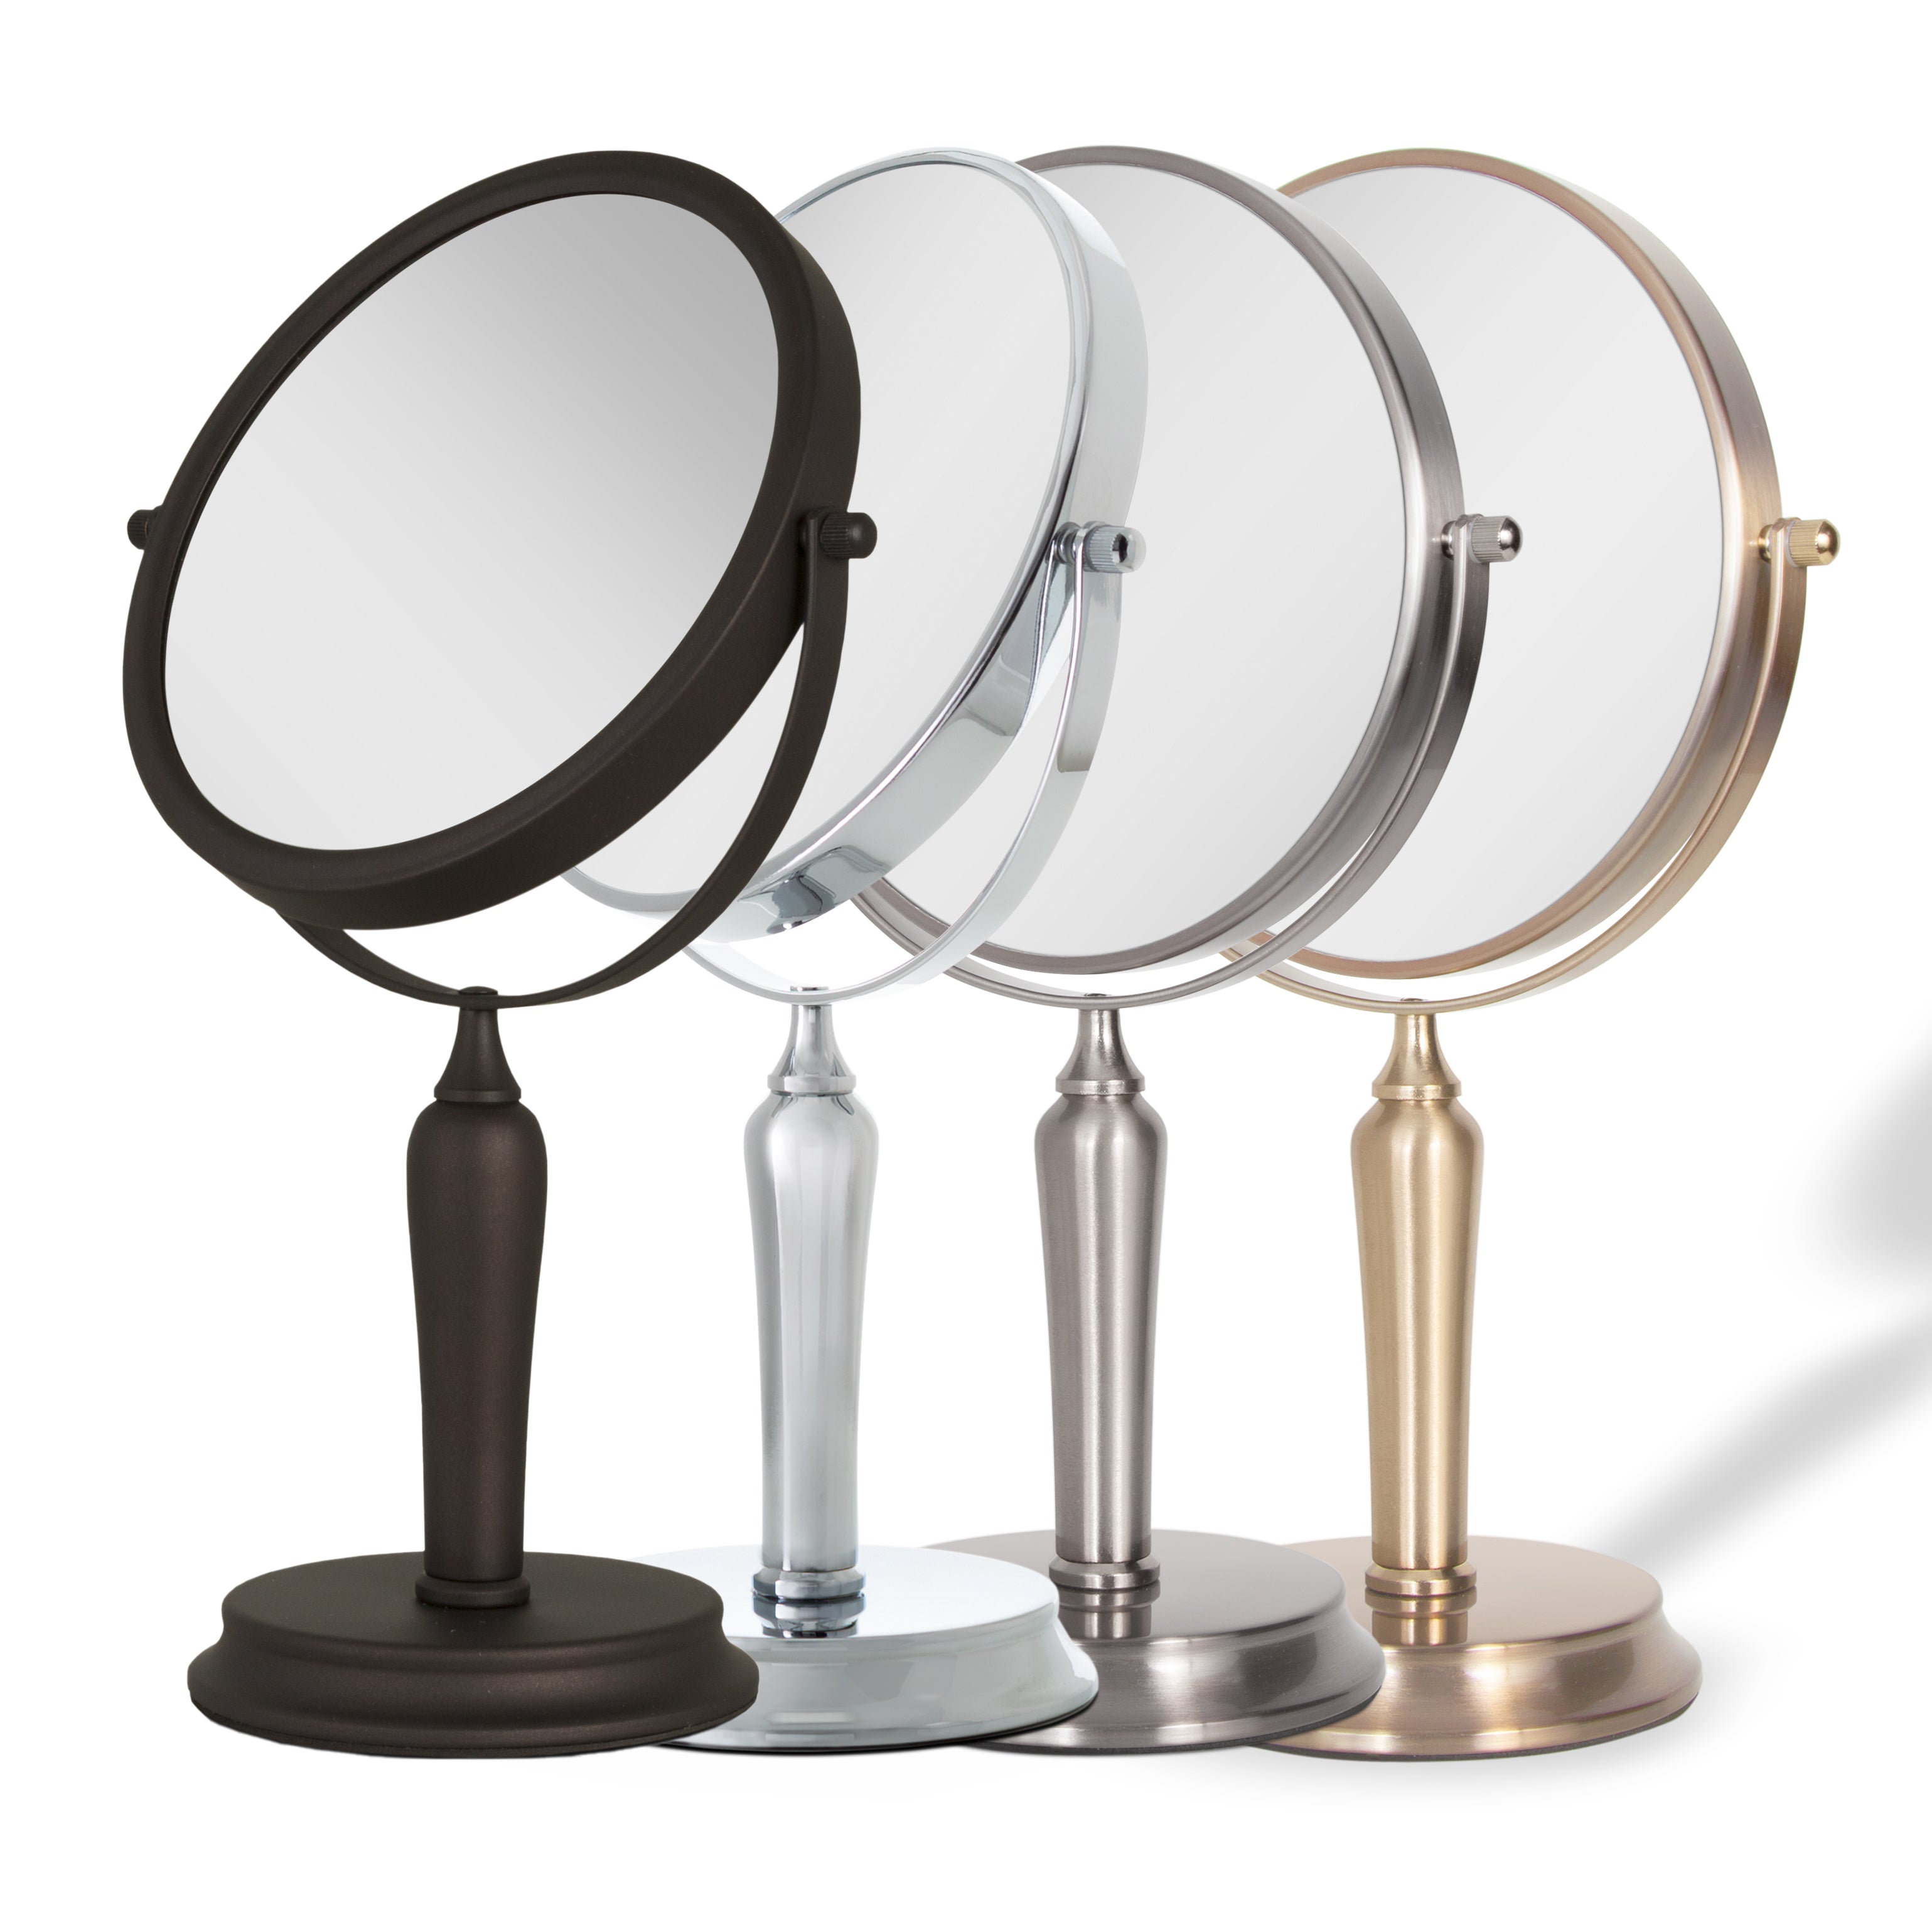 Anaheim Makeup Mirror with Magnification